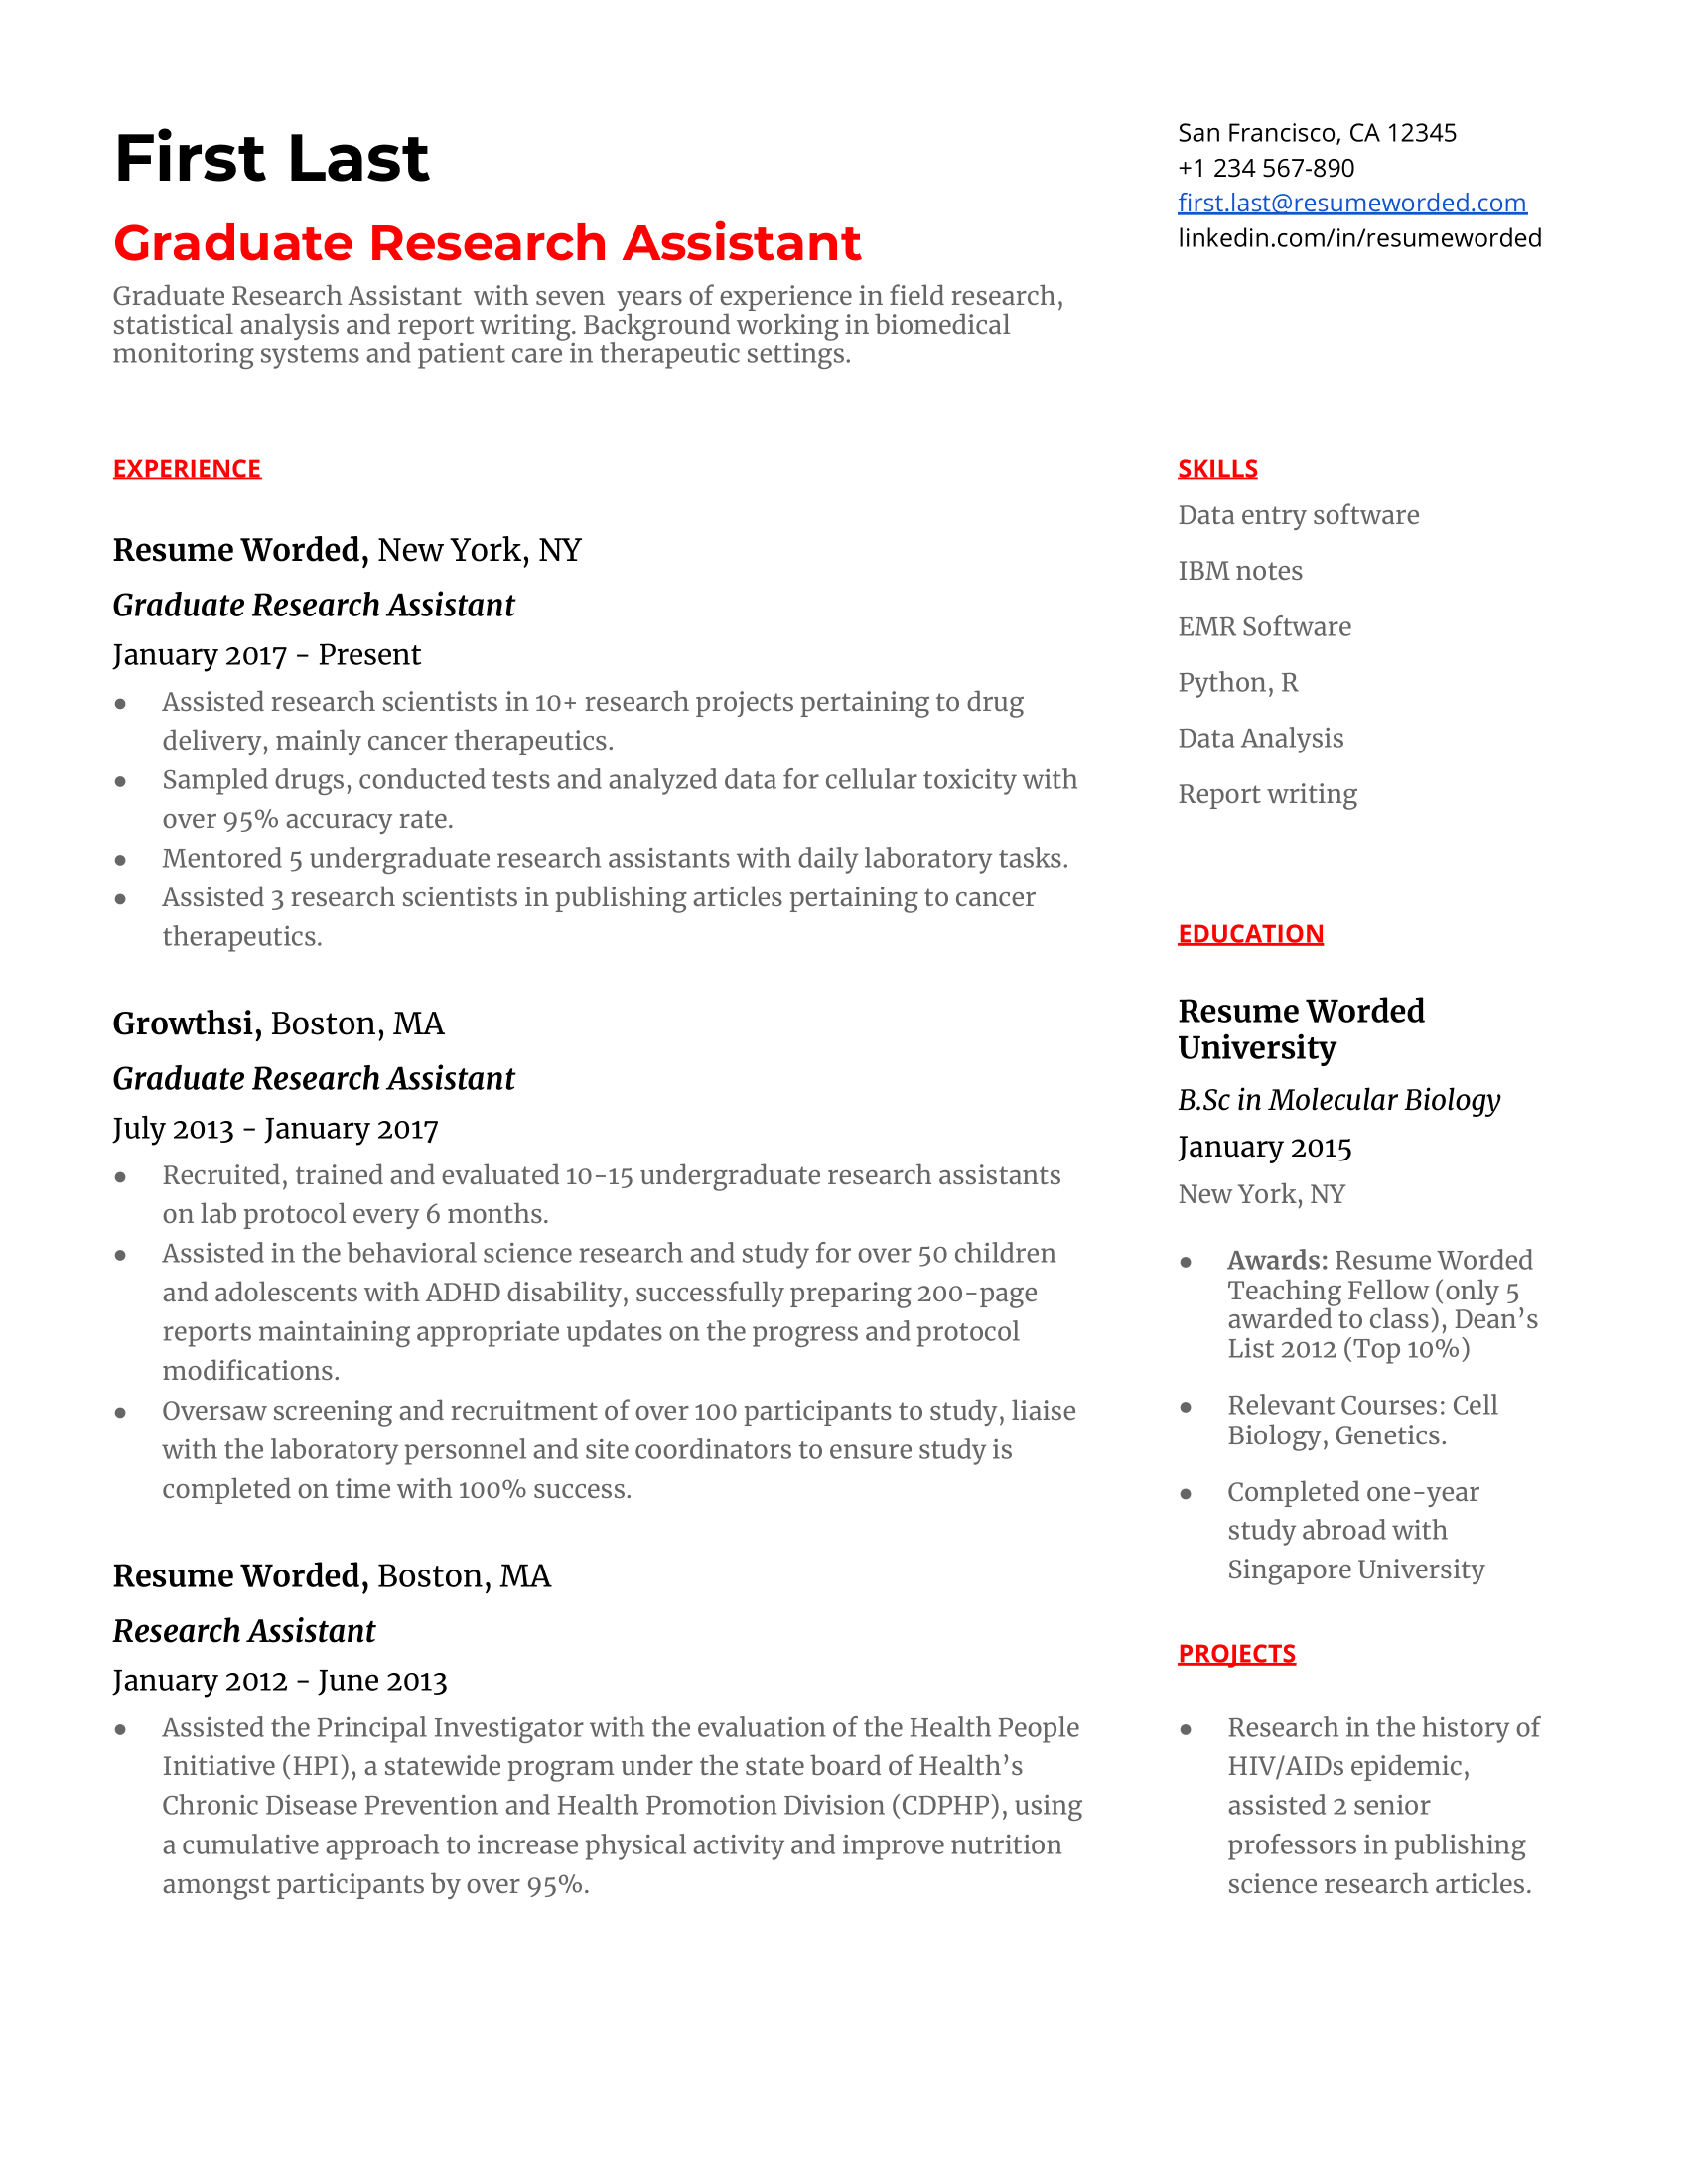 Graduate research assistant resume summary example highlighting student experience and including a short resume summary